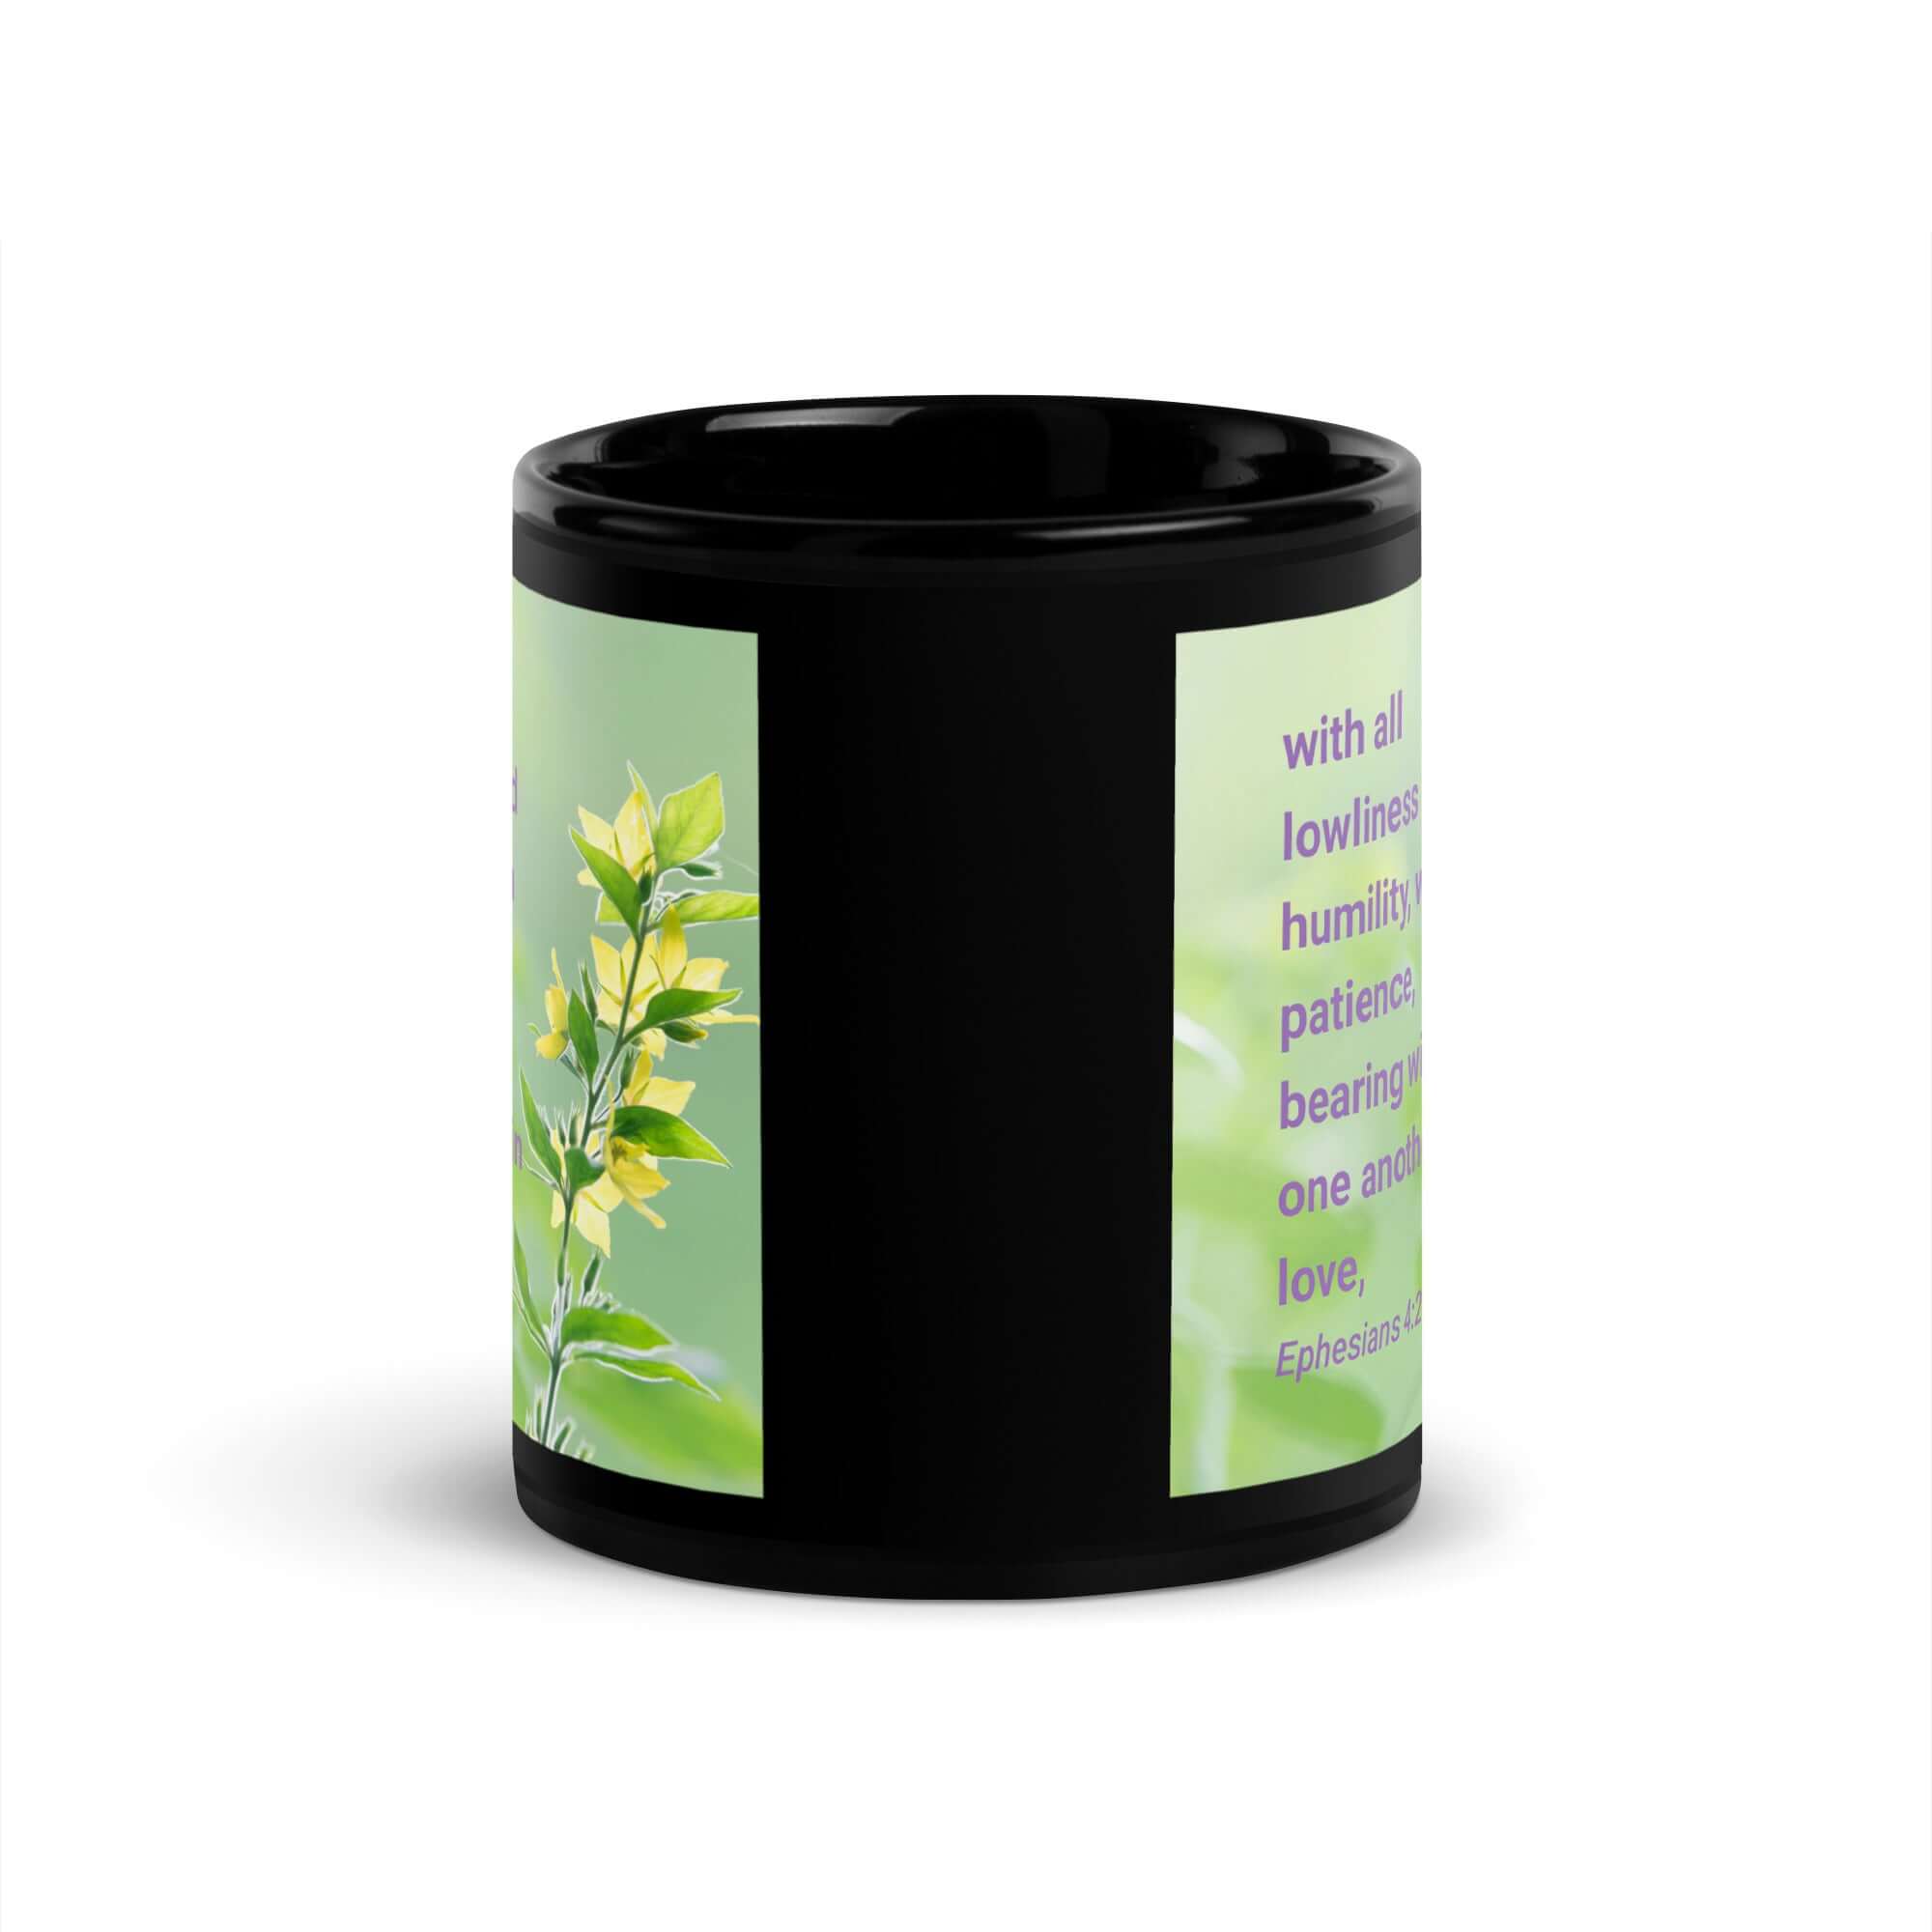 Eph 4:2 - Bible Verse, one another in love Black Glossy Mug